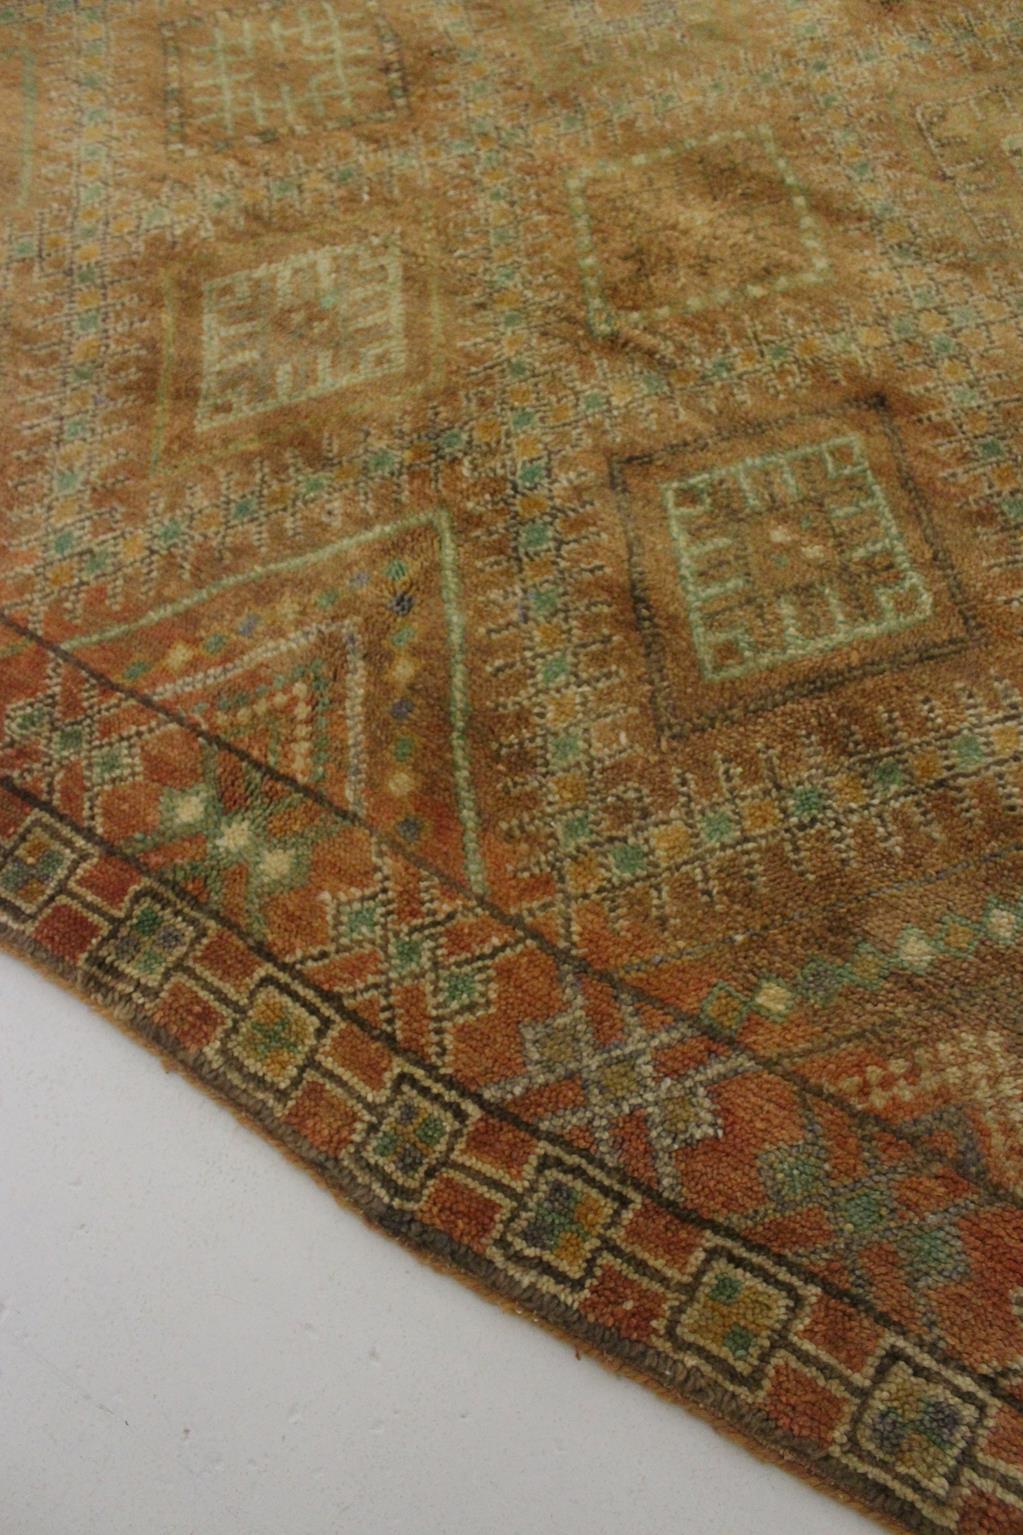 Cotton Vintage Moroccan Zemmour rug - Ochre - 6x11.3feet / 185x345cm For Sale